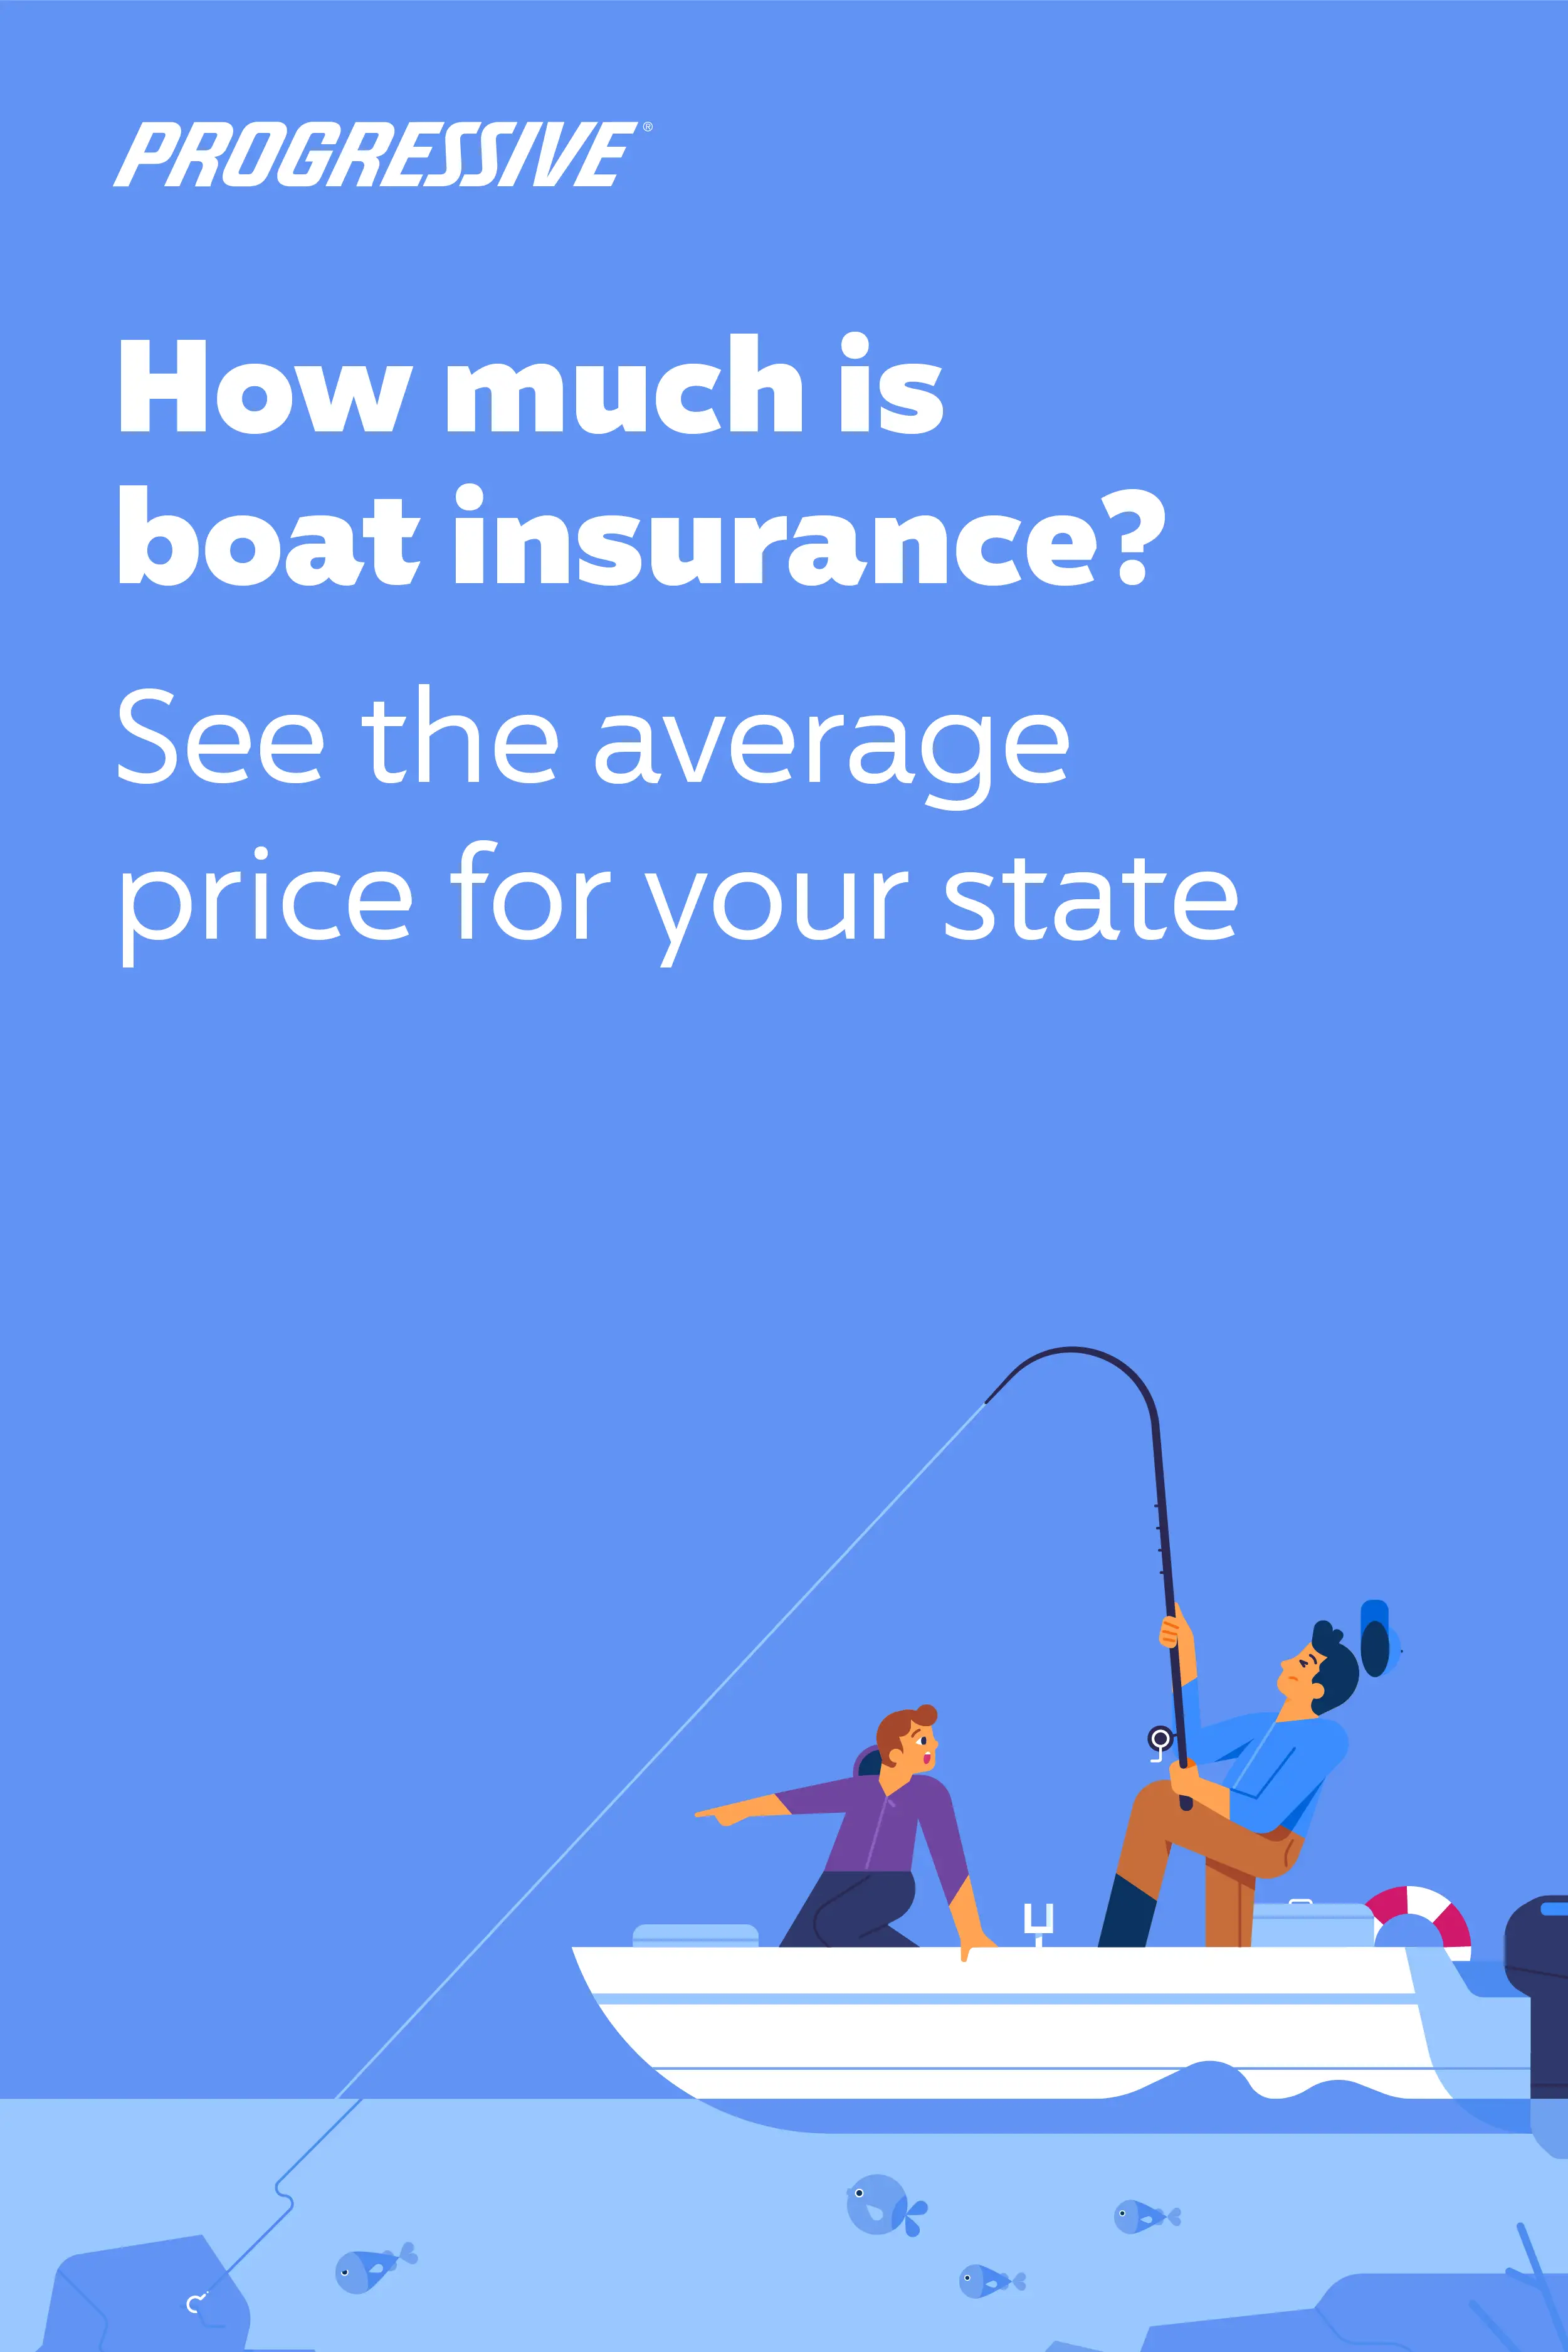 How much is boat insurance? in 2020